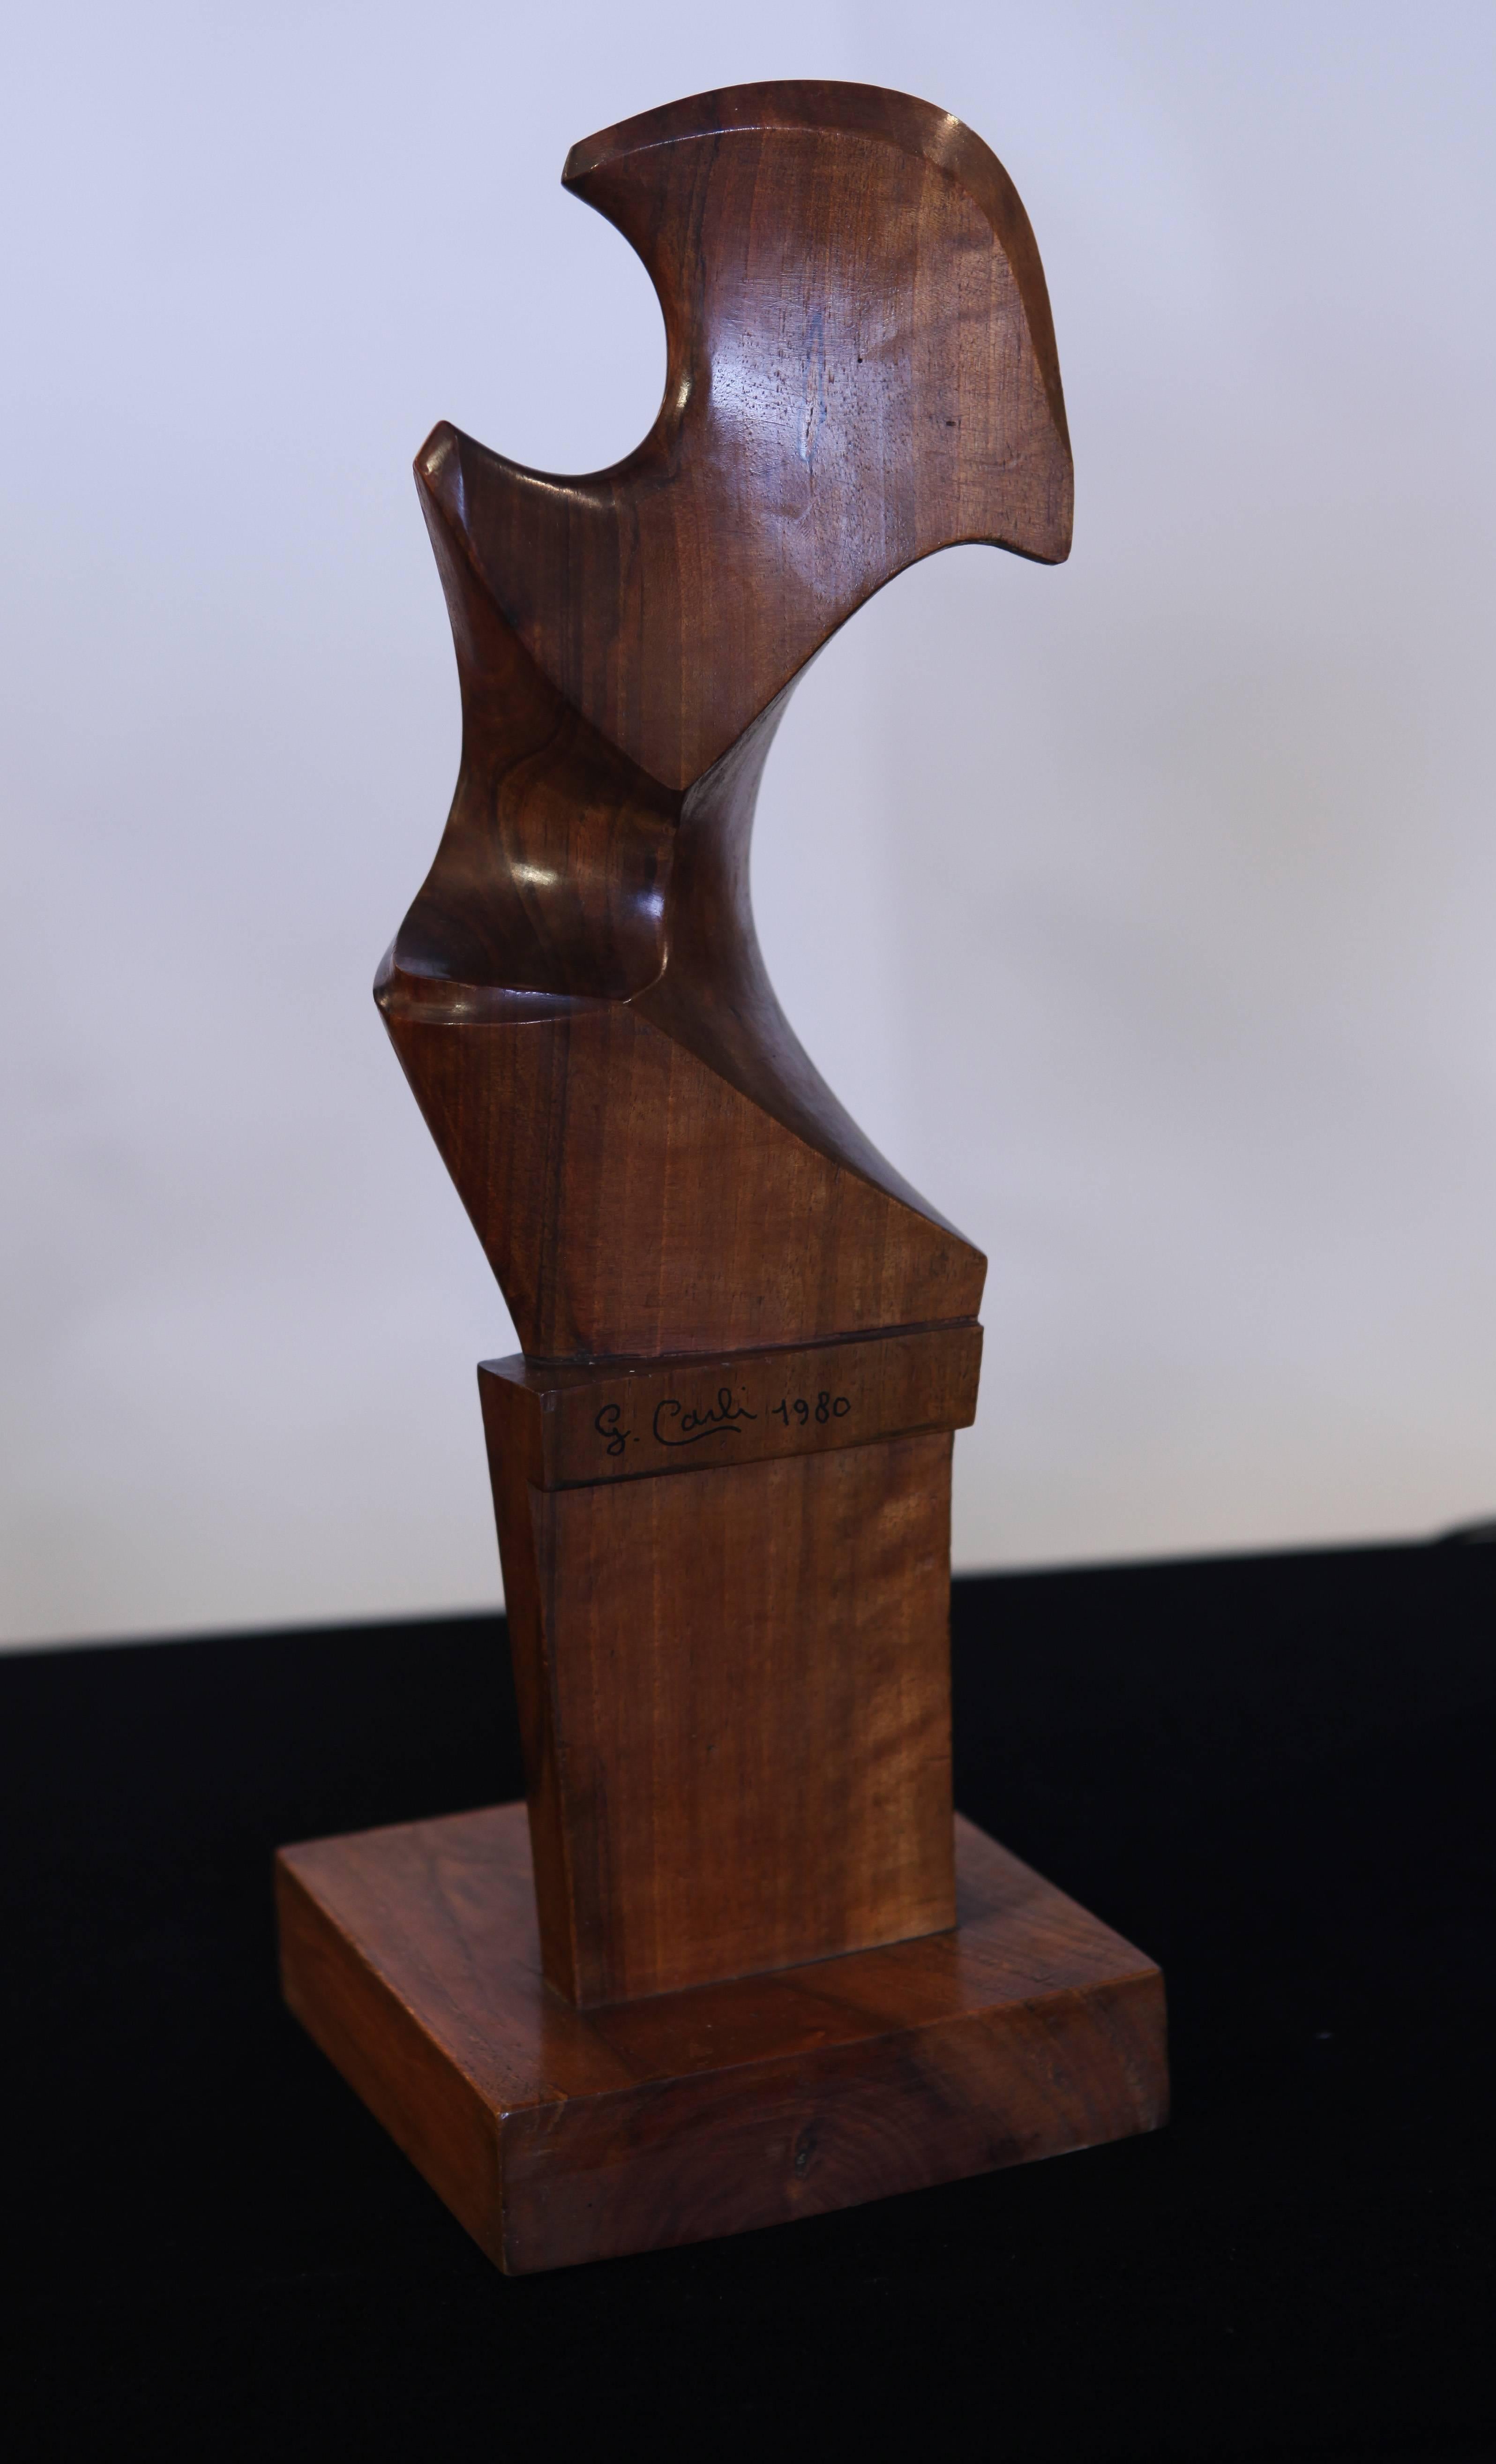 1980, wood carving sculpture signed by G. Carli.

 Giuseppe Carli was one of the foremost maestro remeri, or forcoli carvers, in Venice. He also carved sculptures in the forms of forcoli. The fórcola is an oarlock used on the gondolas of Venice.